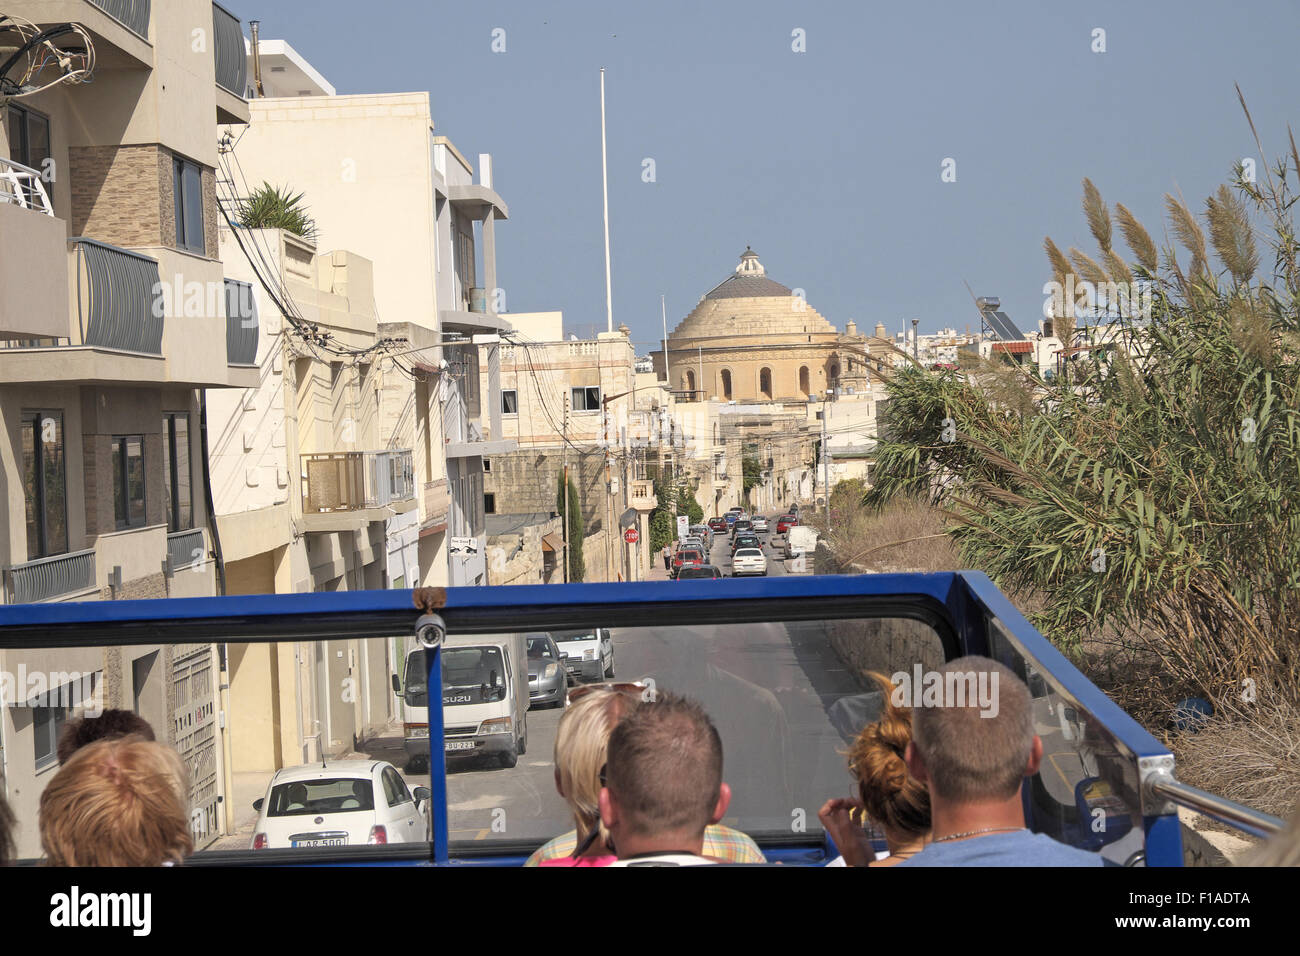 Rotunda of the Assumption seen from an open topped bus, Mosta, Malta. Stock Photo